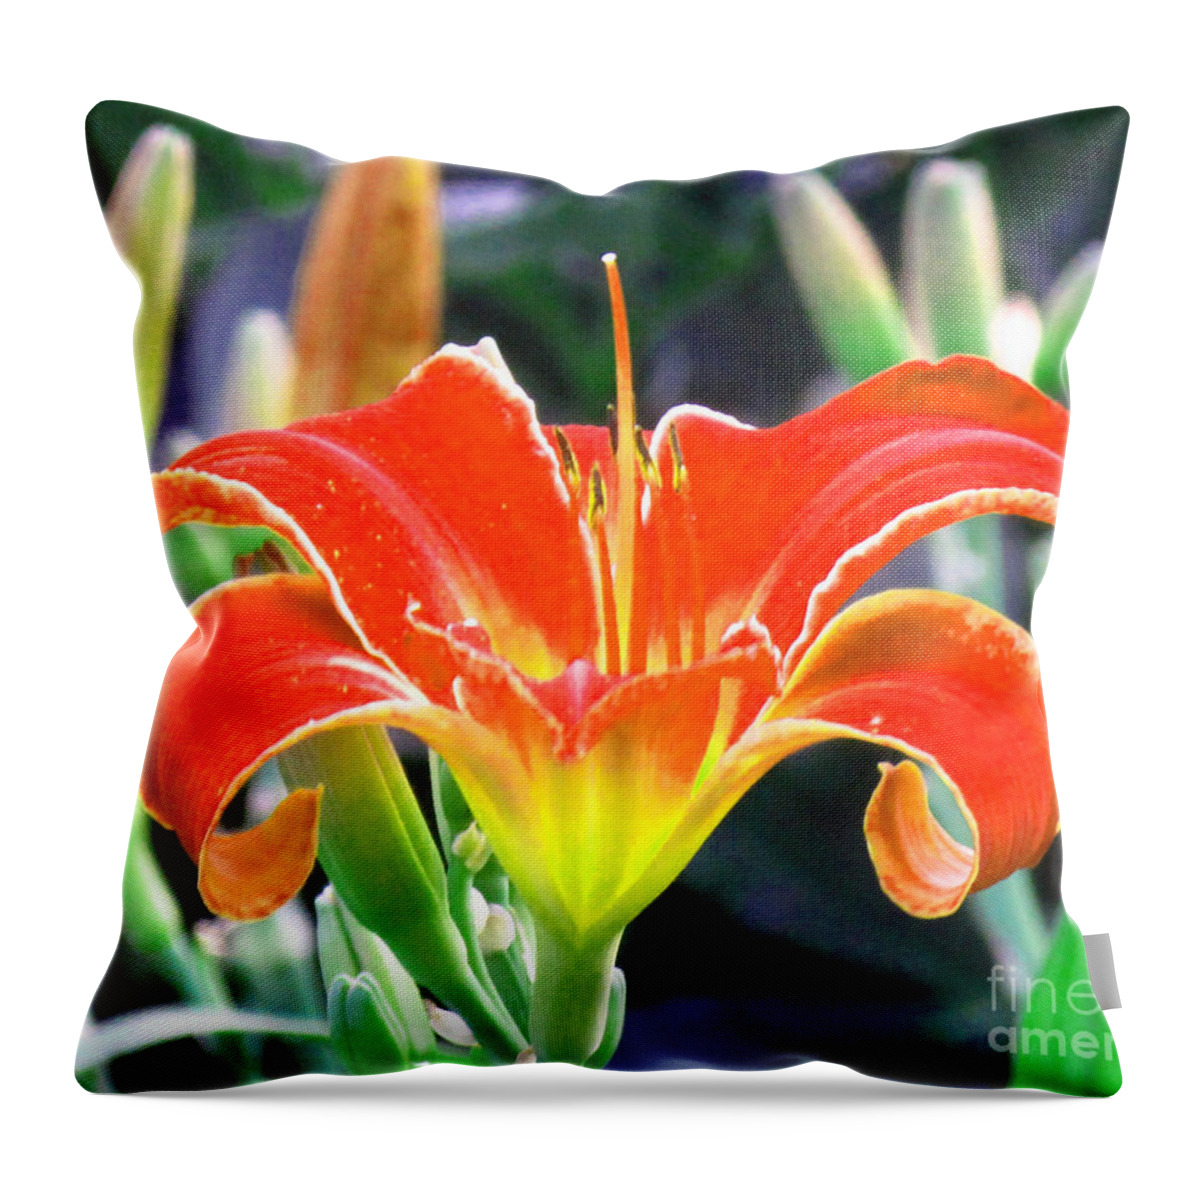 Orange Lily Throw Pillow featuring the photograph Orange Lily by Delynn Addams